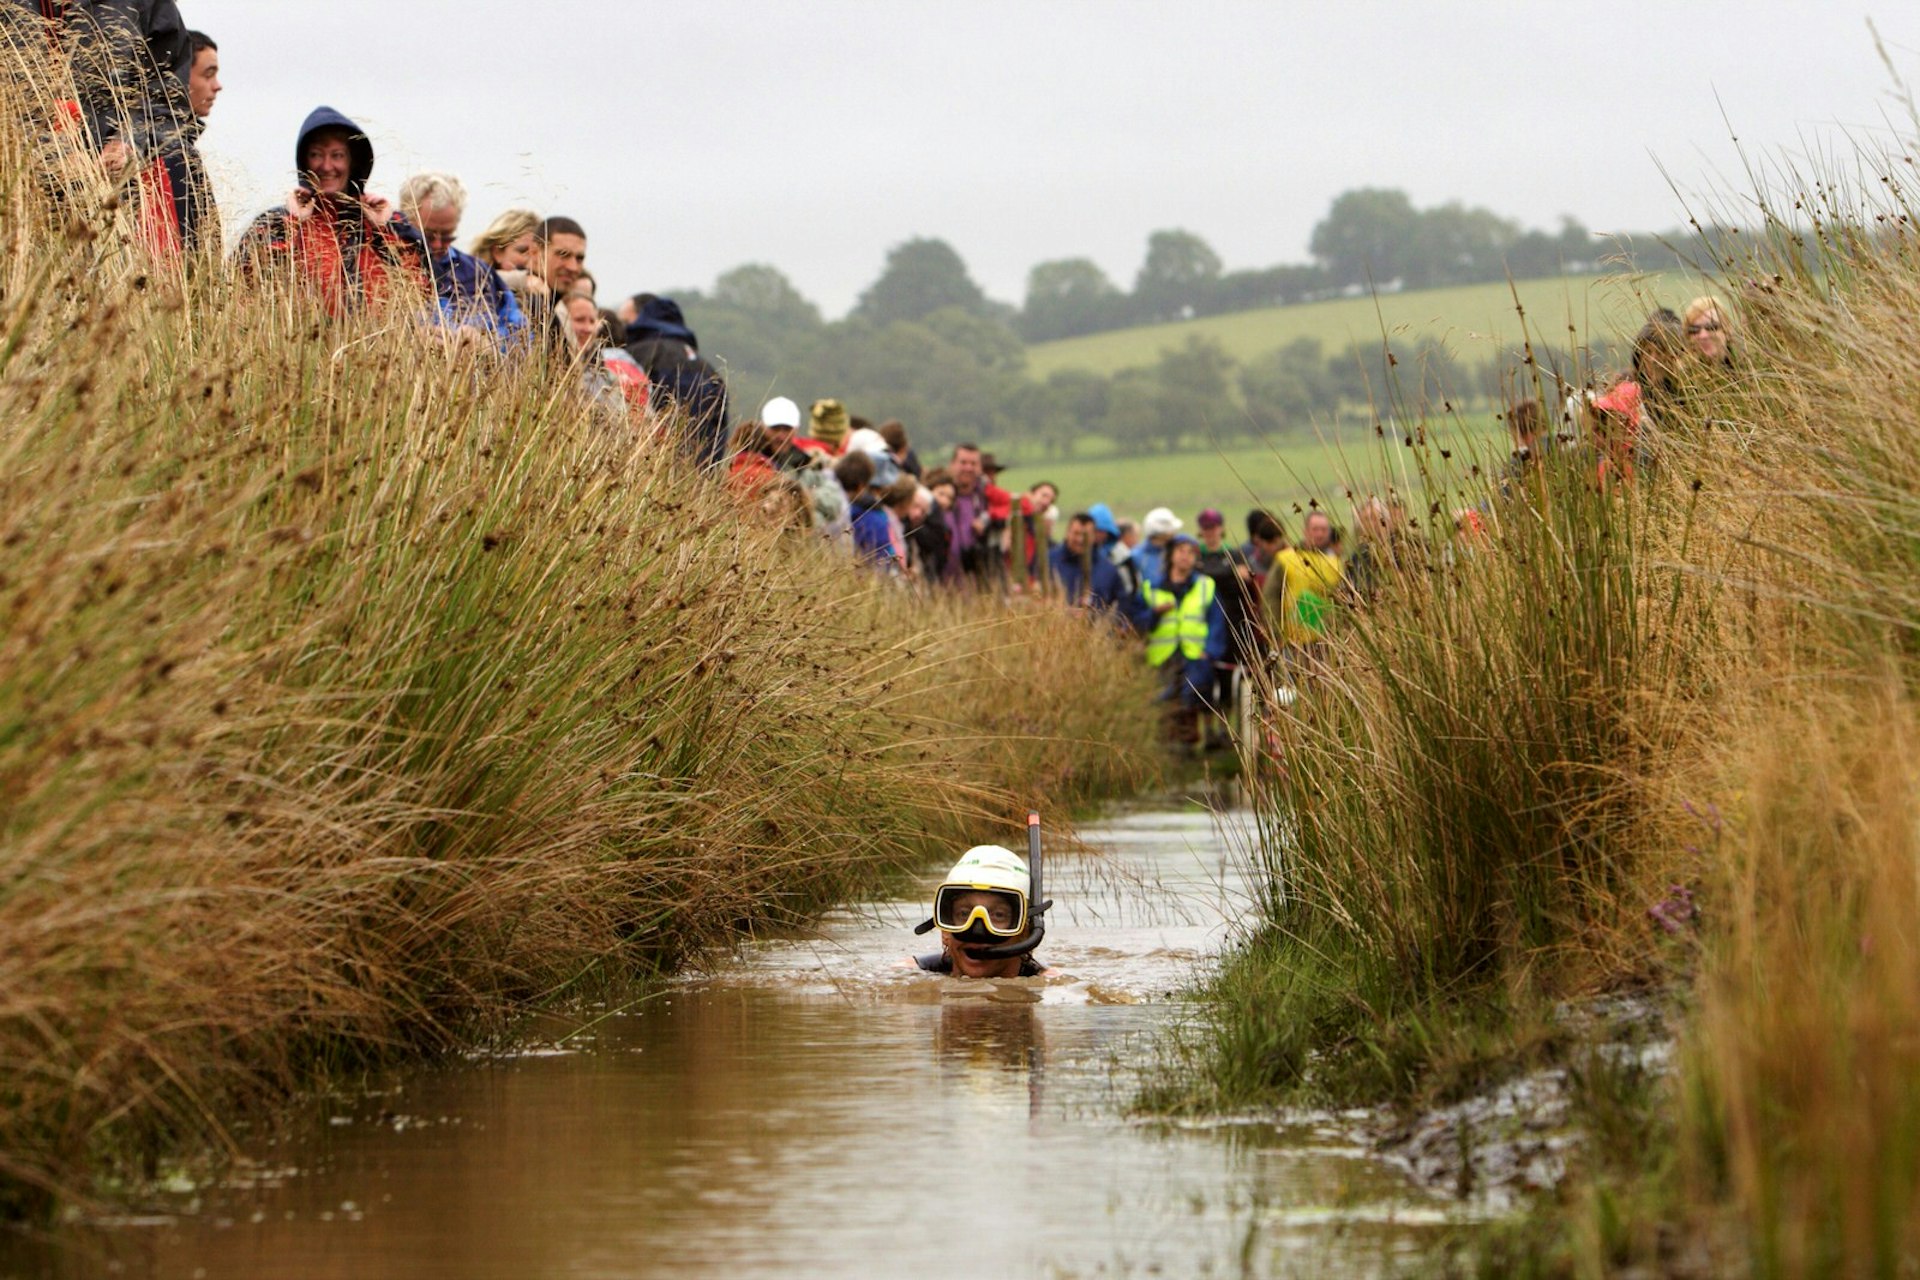 One bog + some people with snorkels = classic eccentric British event © Emma Wood / Getty Images